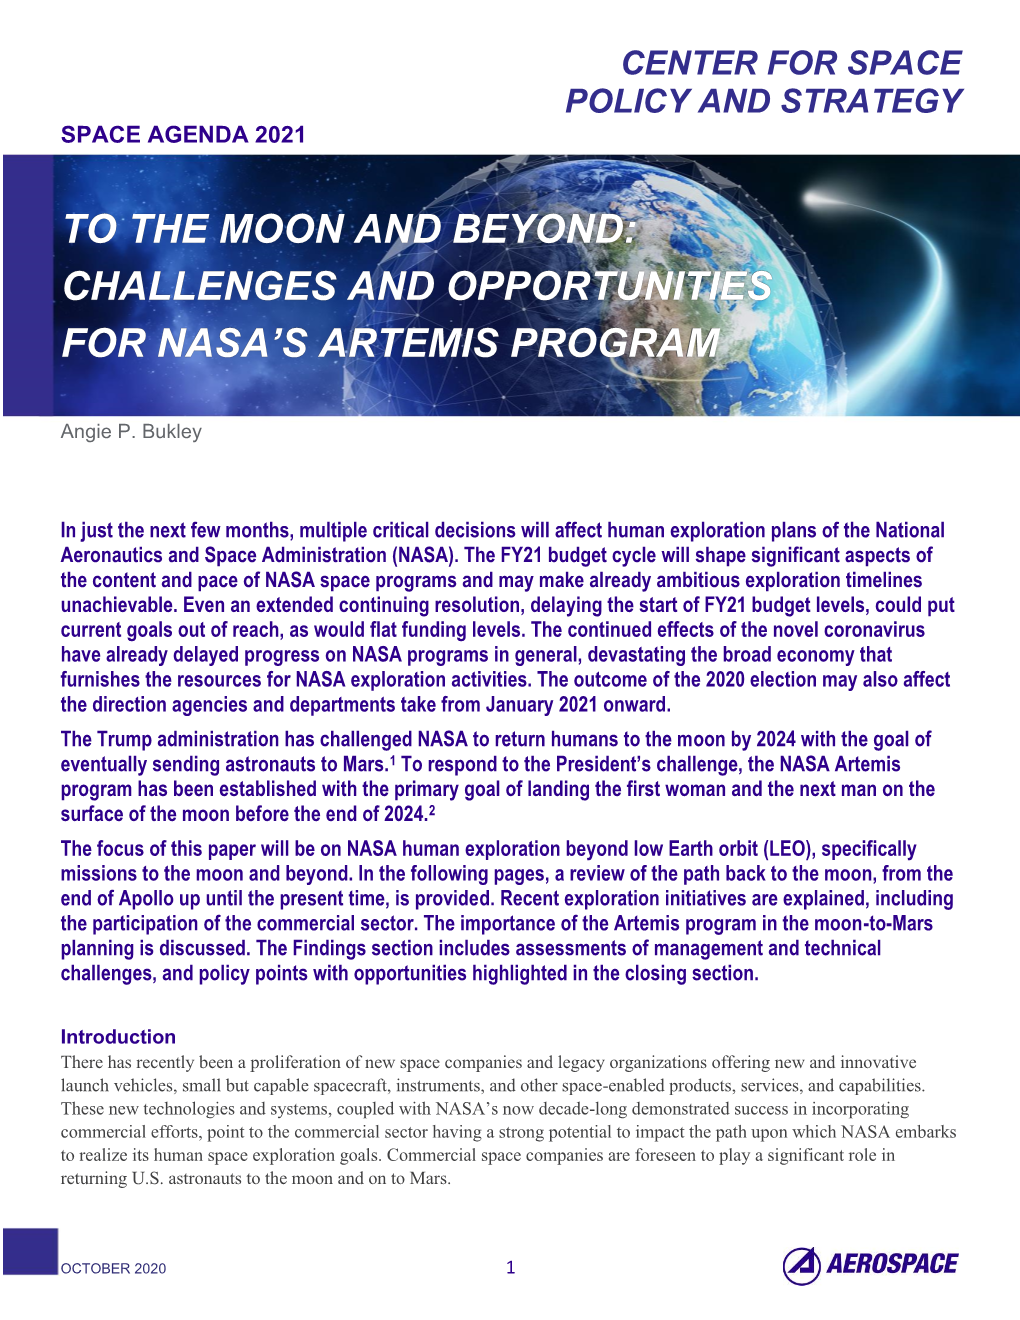 To the Moon and Beyond: Challenges and Opportunities for Nasa’S Artemis Program